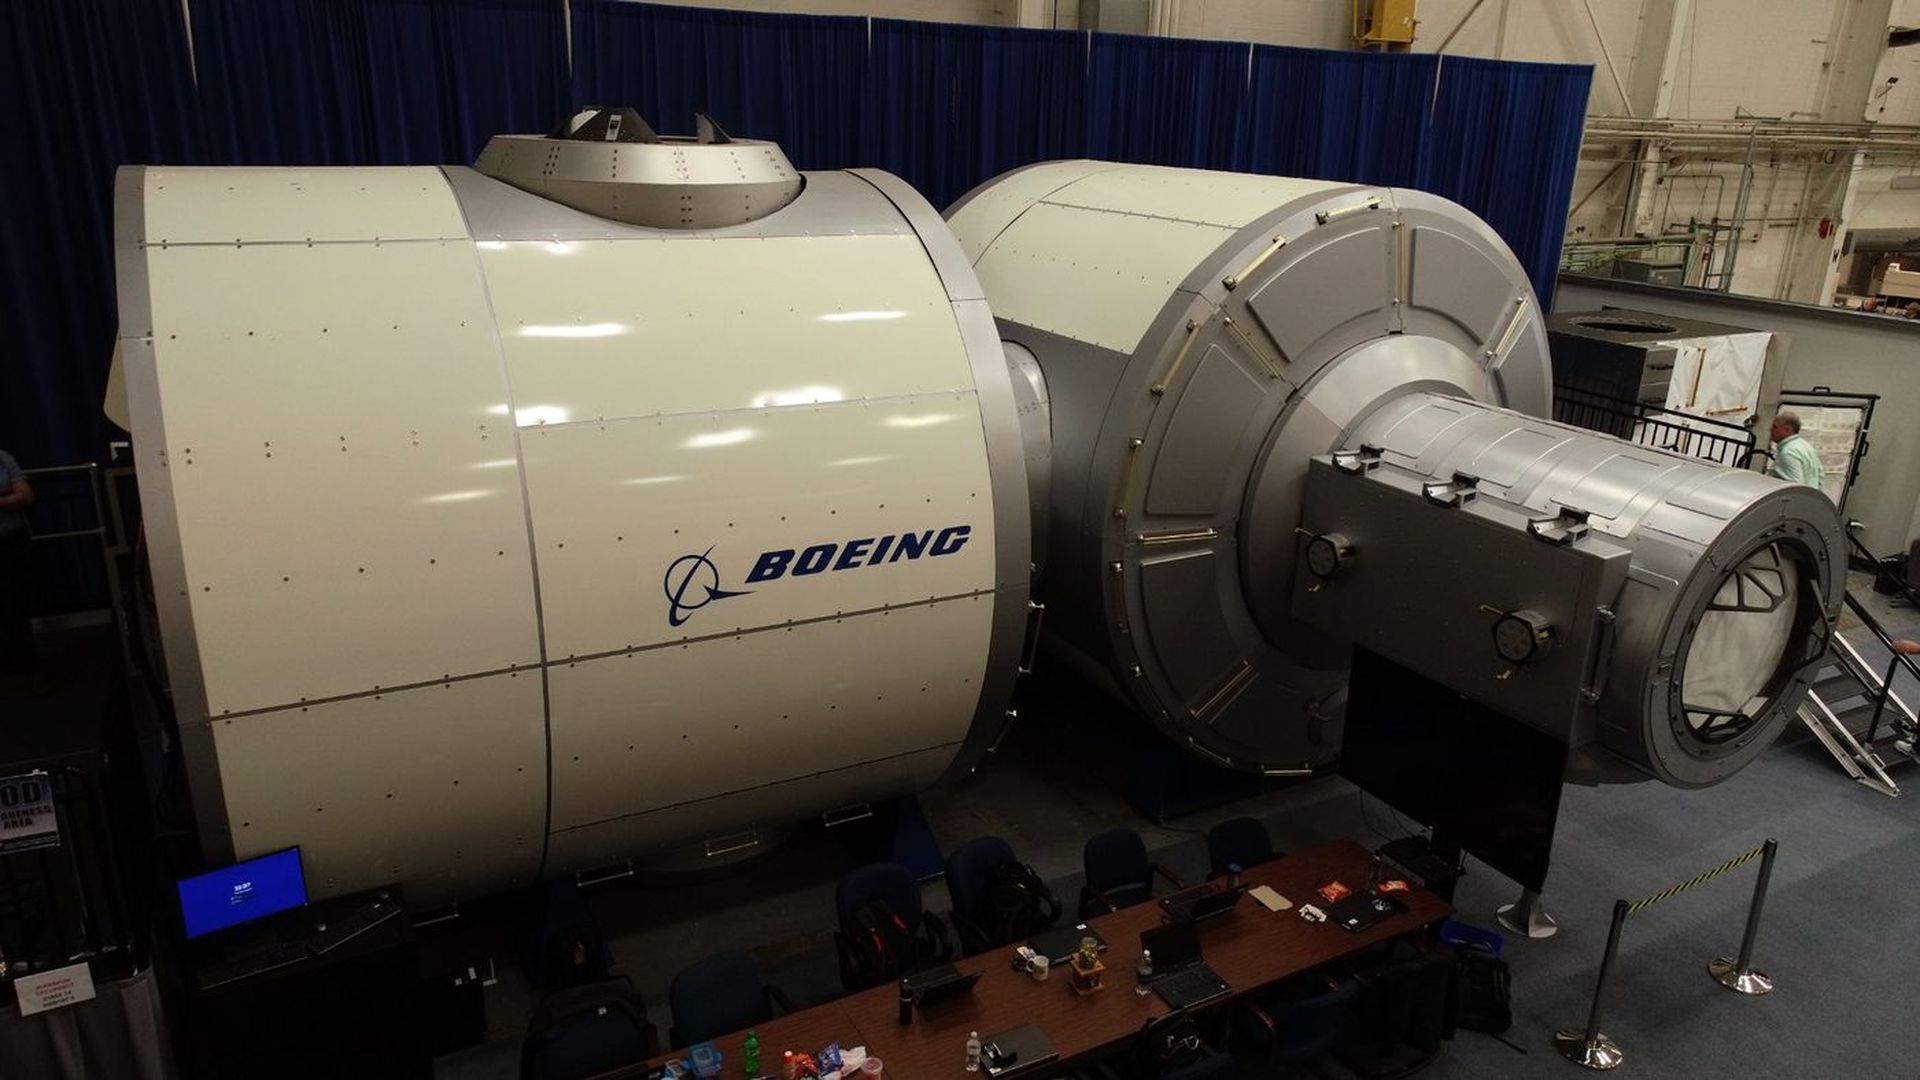 In this image, the Boeing logo is seen on the side of a large white circular gateway demonstrator.